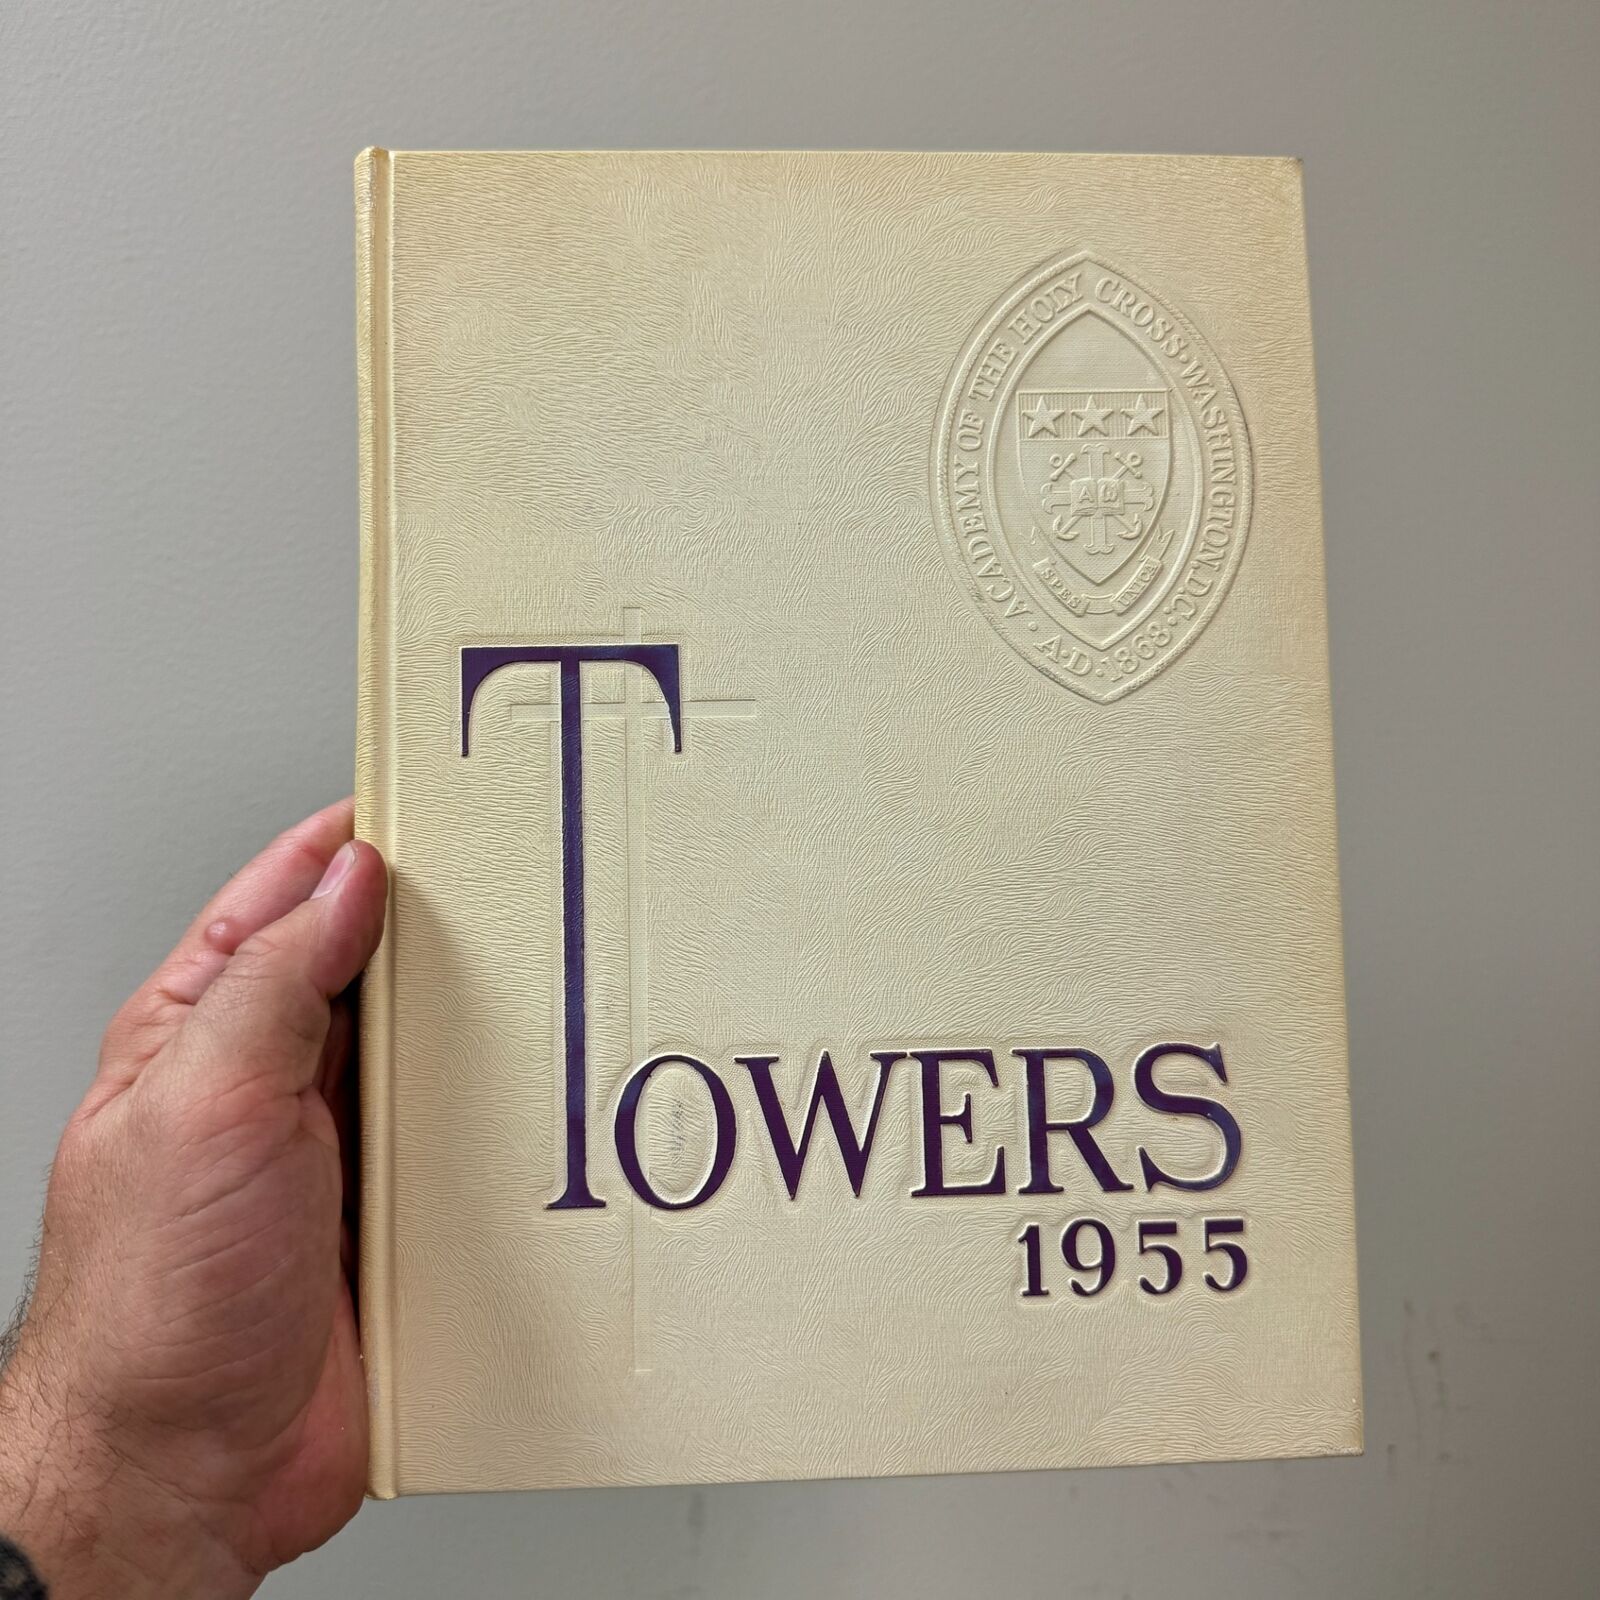 ACADEMY OF THE HOLY CROSS Yearbook 1955 - Washington, DC - TOWERS